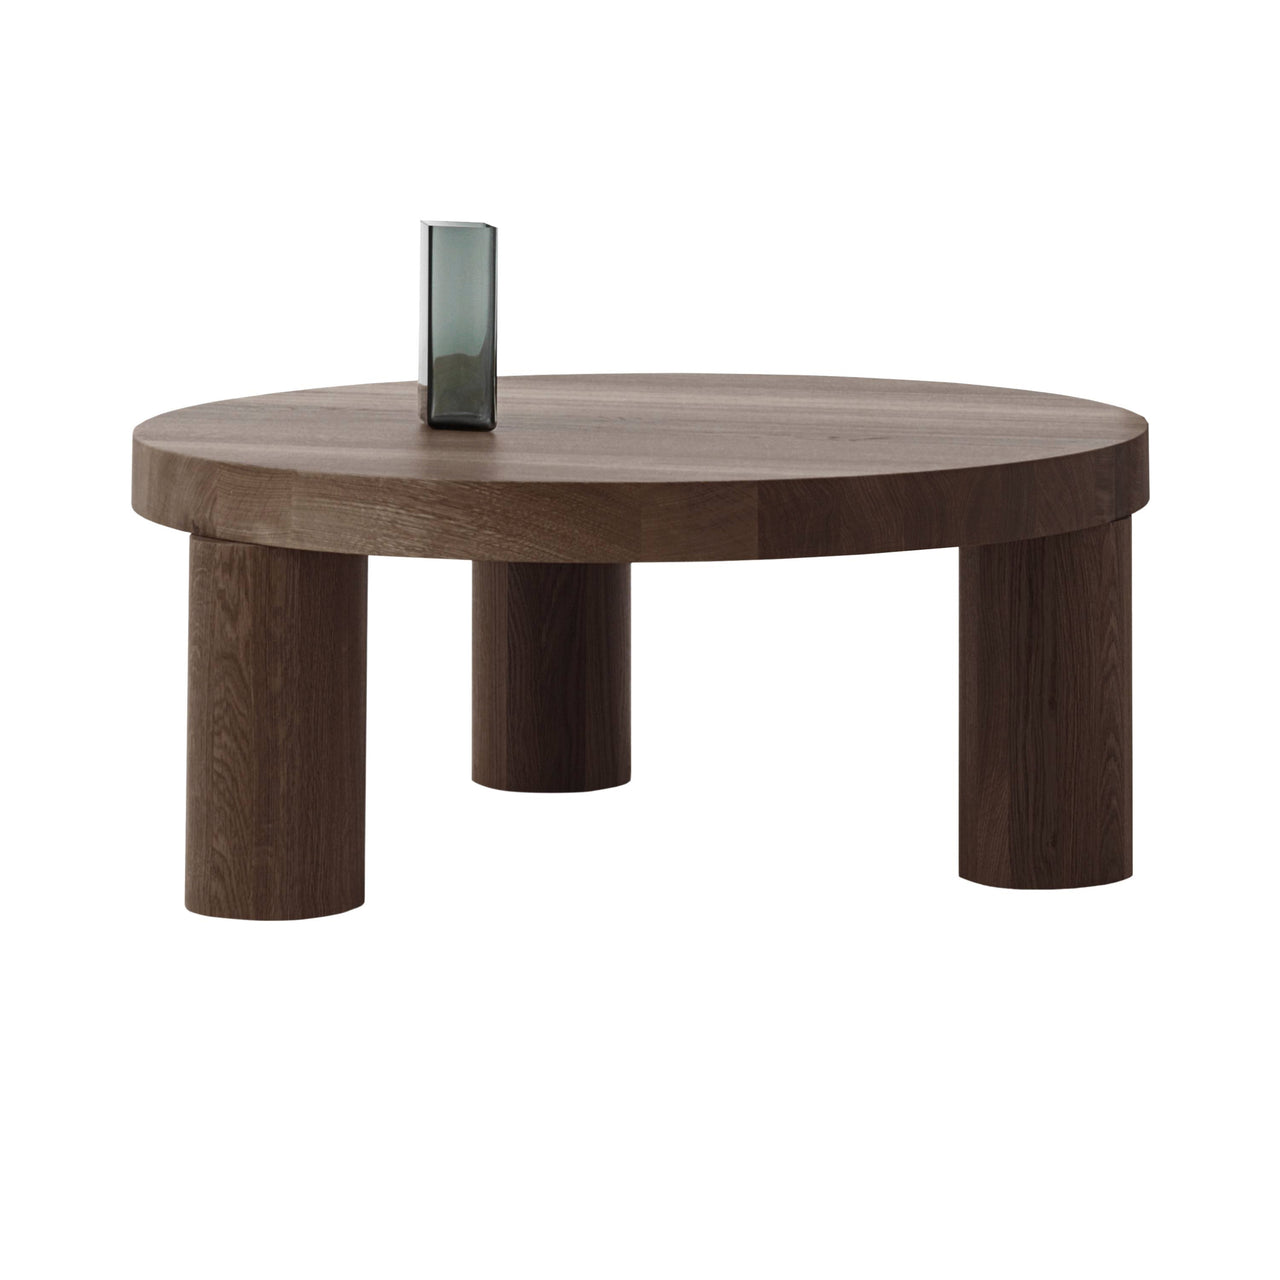 Offset Coffee Table: Umber Stained Oak